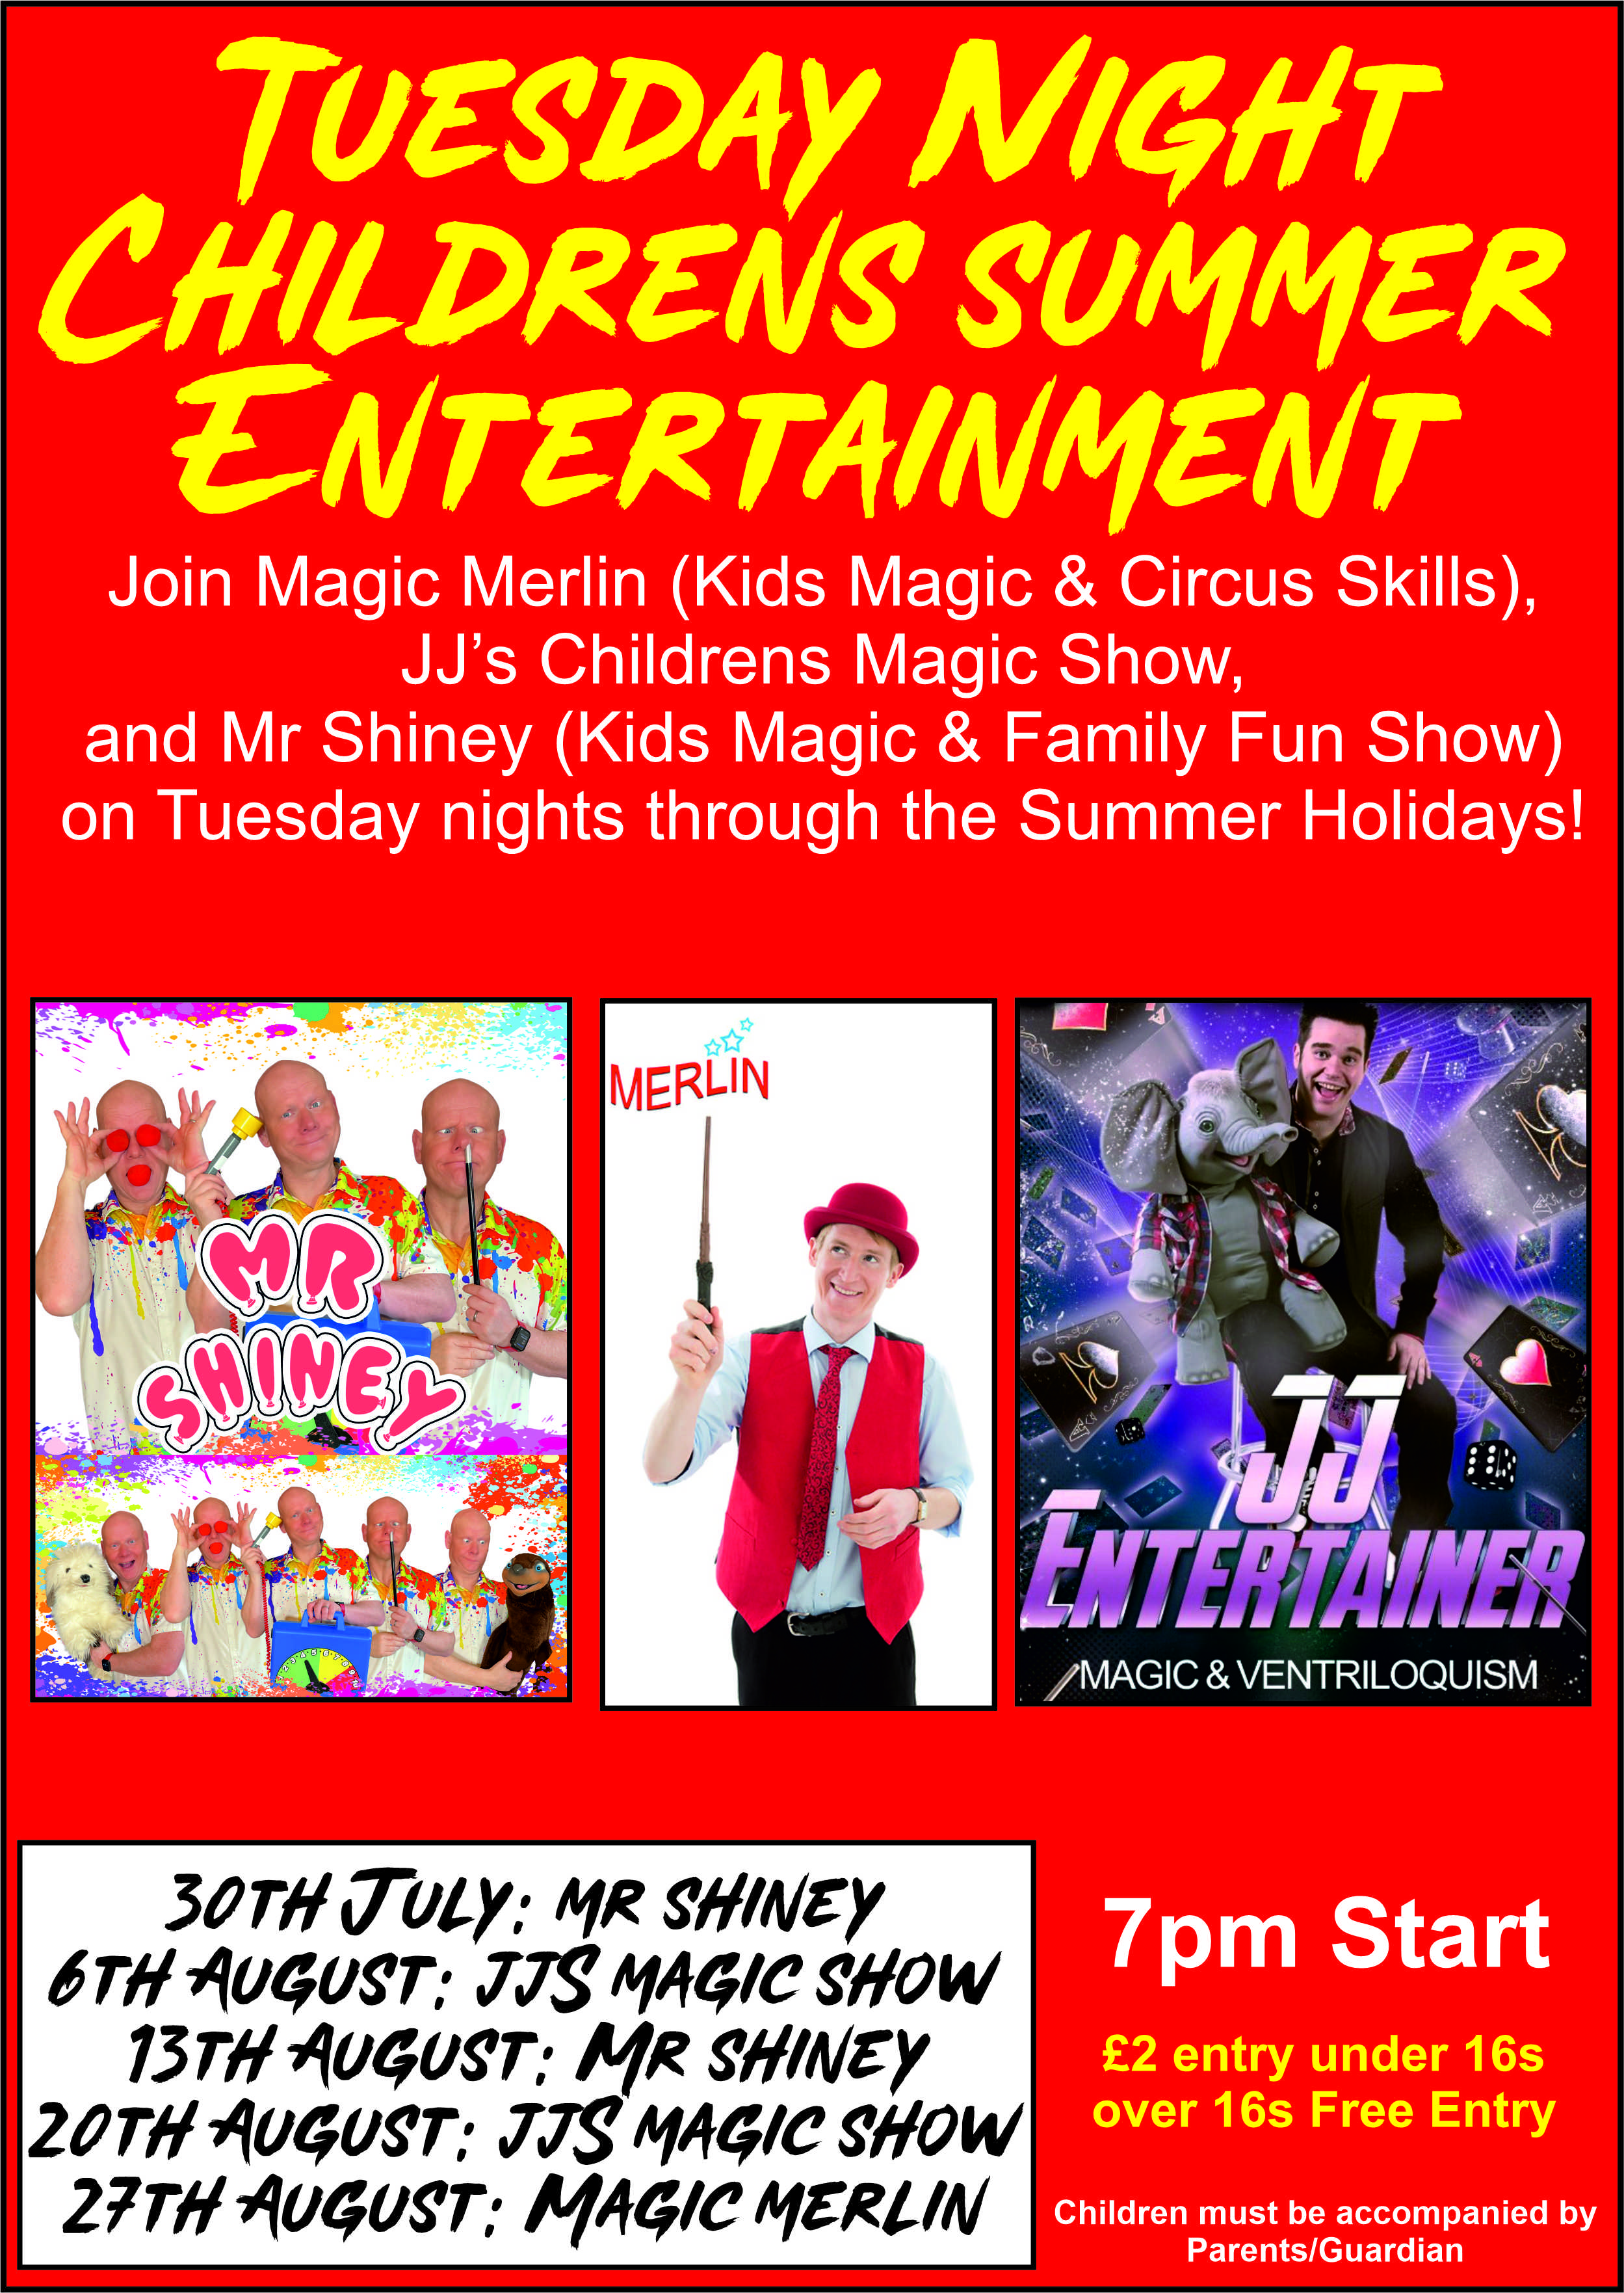 Childrens Entertainment with Magic Merlin